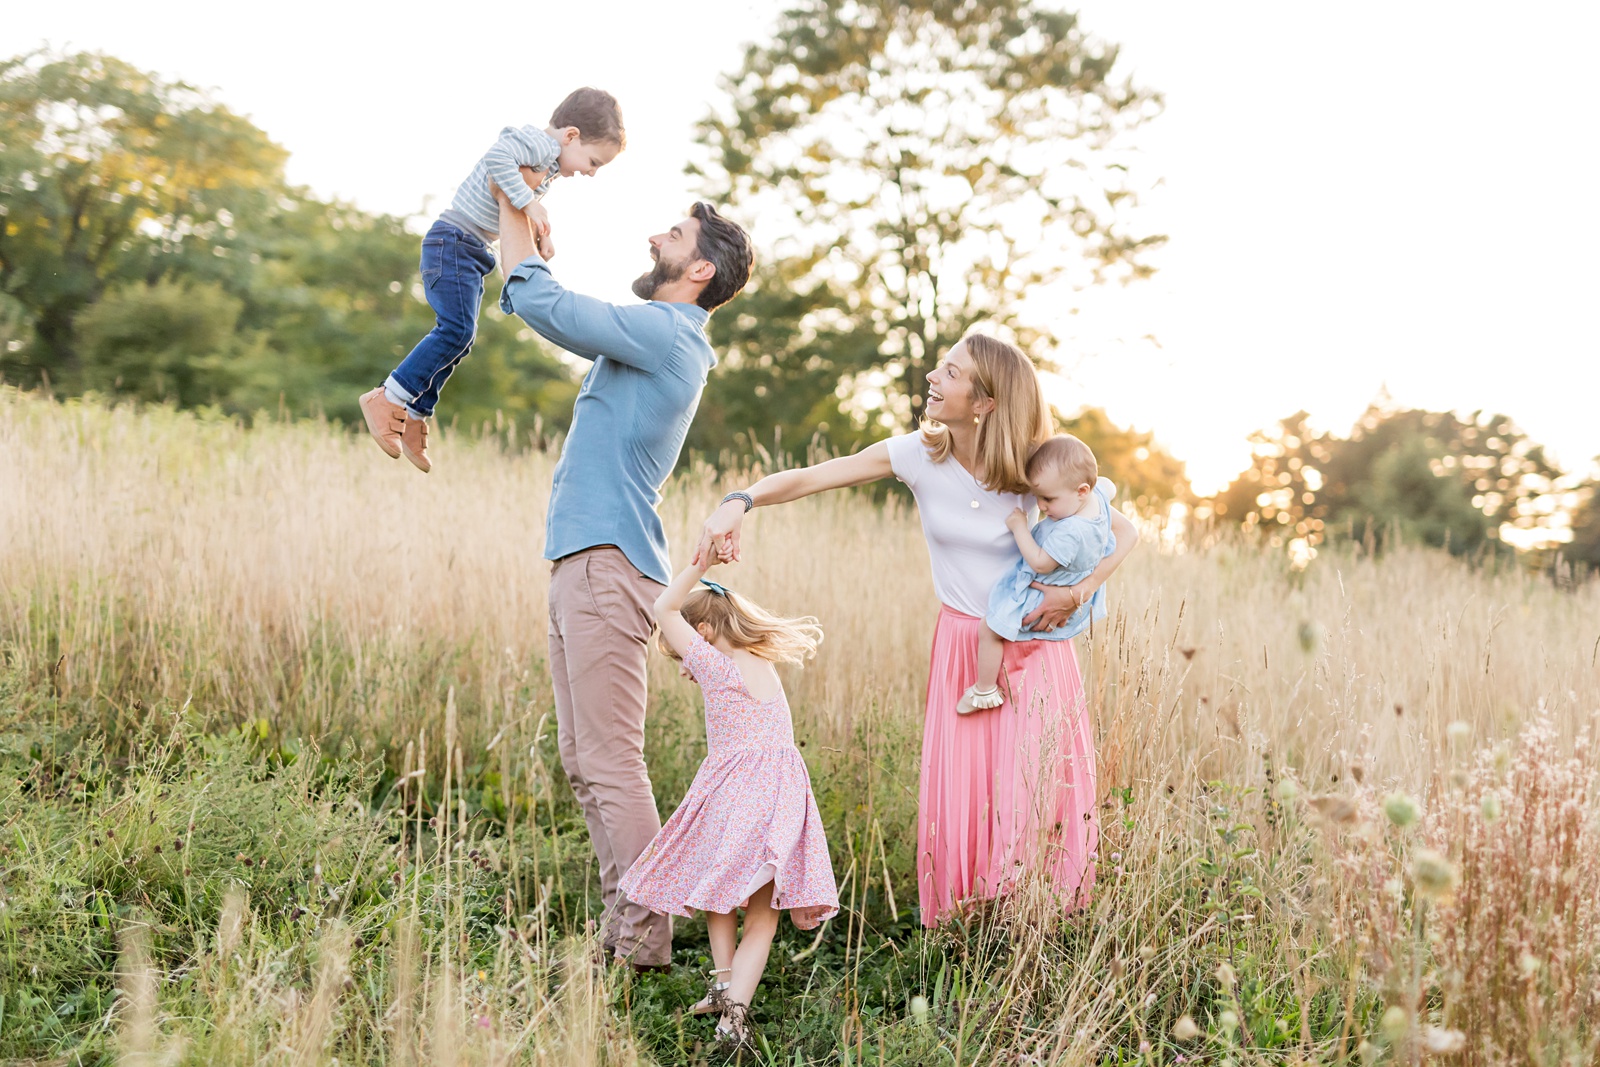 Pink-outfit-2 70+ Best Chosen Family Photo Outfit Ideas in Summer 2022